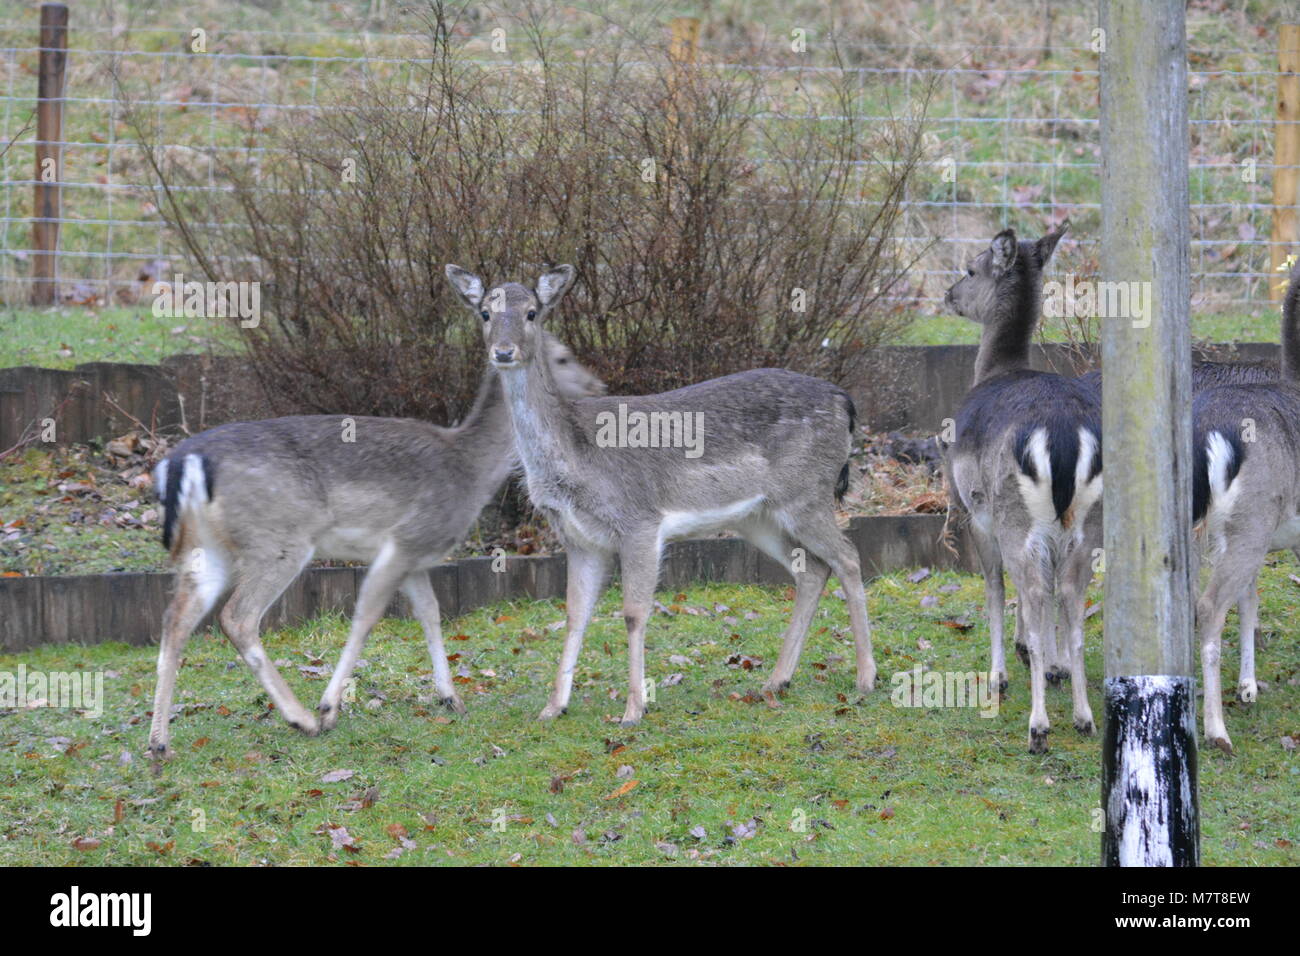 Young Sika deer Cervus nippon standing on lawn in garden close to woodland in front of stock cattle wire mesh fence The Doward Herefordshire England Stock Photo